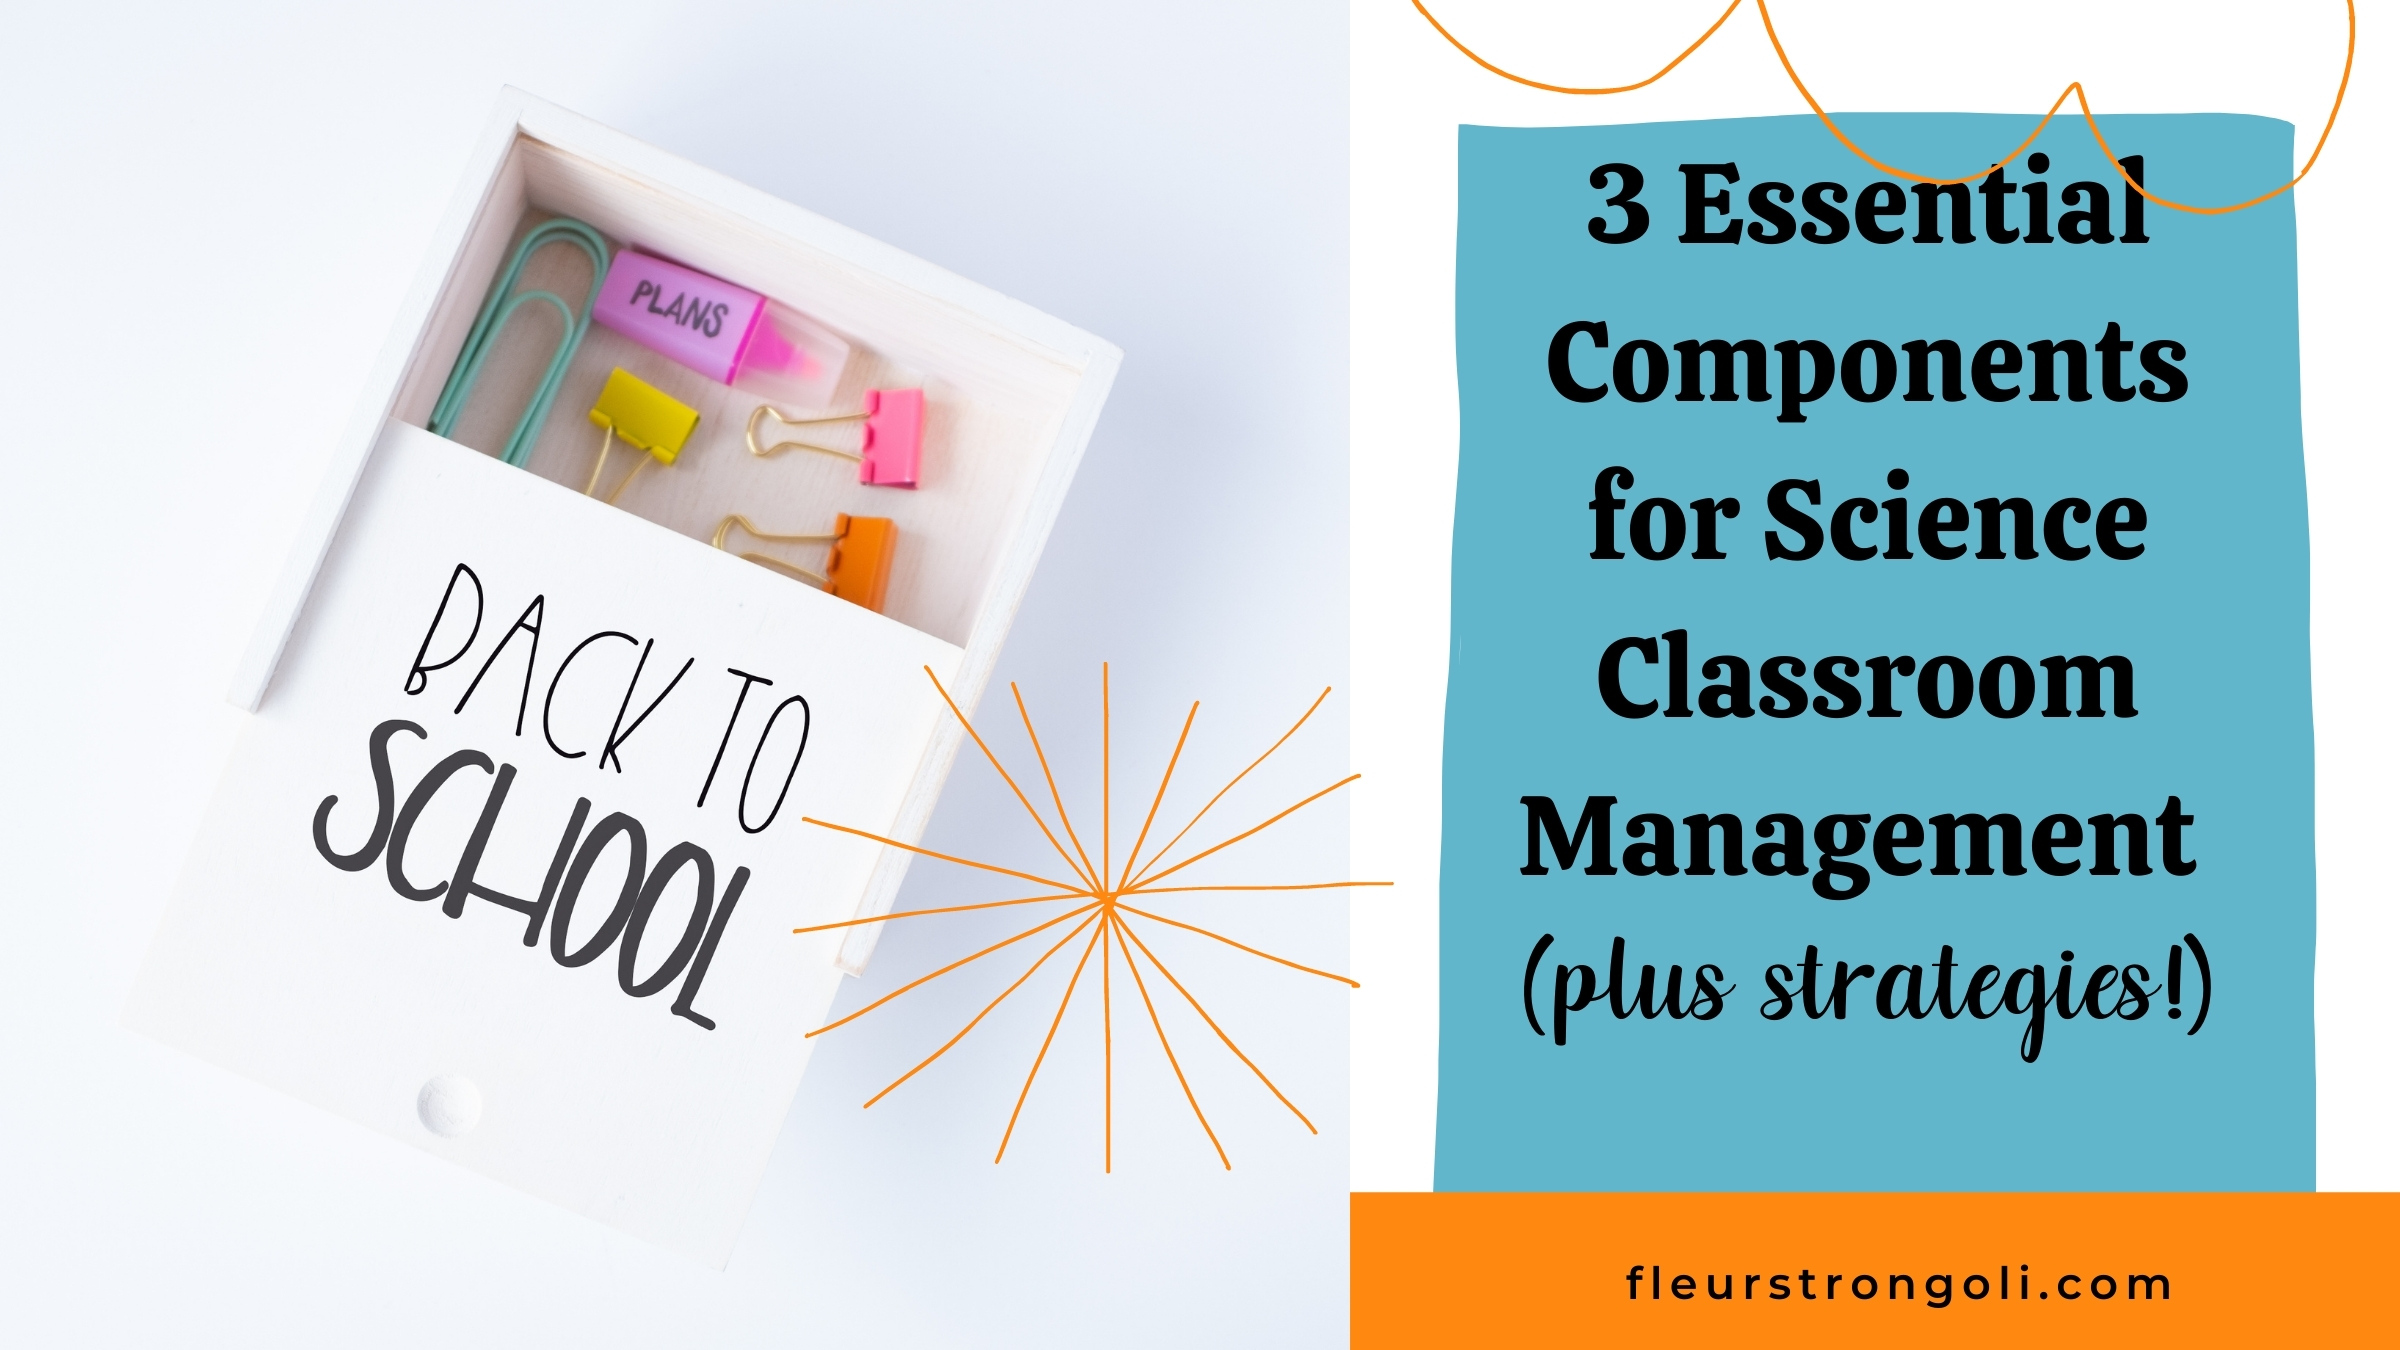 Title for blog 3 Essential Components for Science Classroom Management plus Strategies